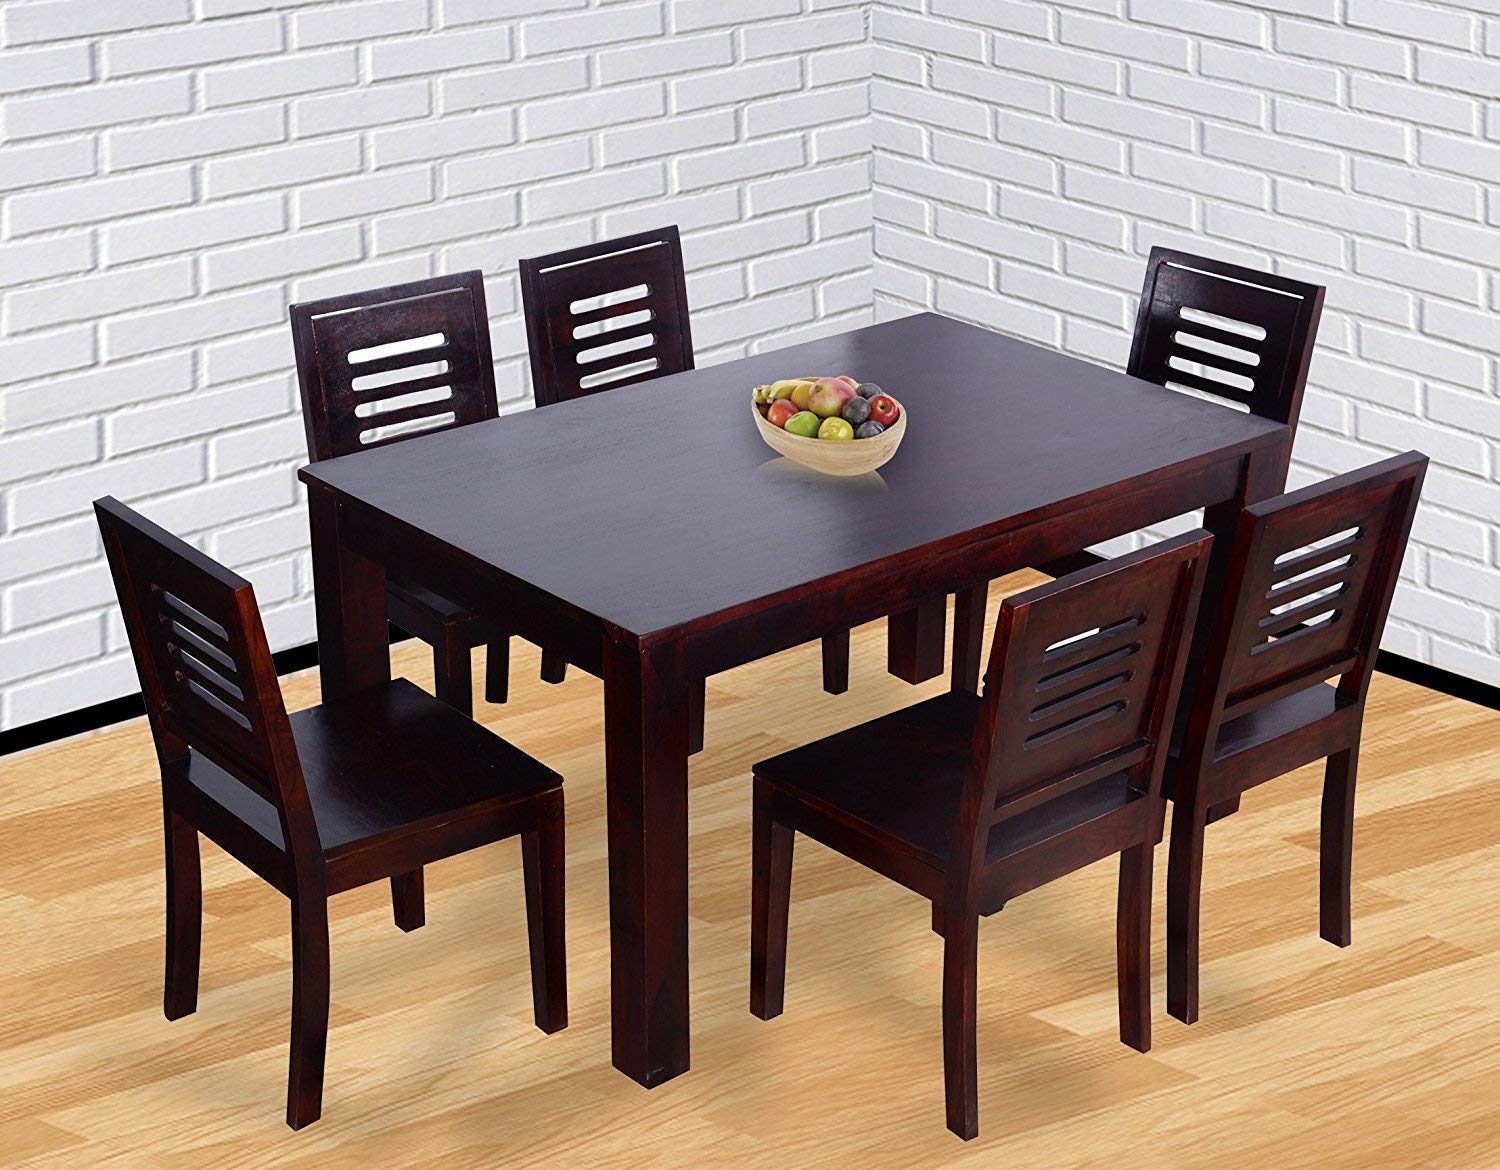 Different Types of Dining Table Sets on Pepperfry